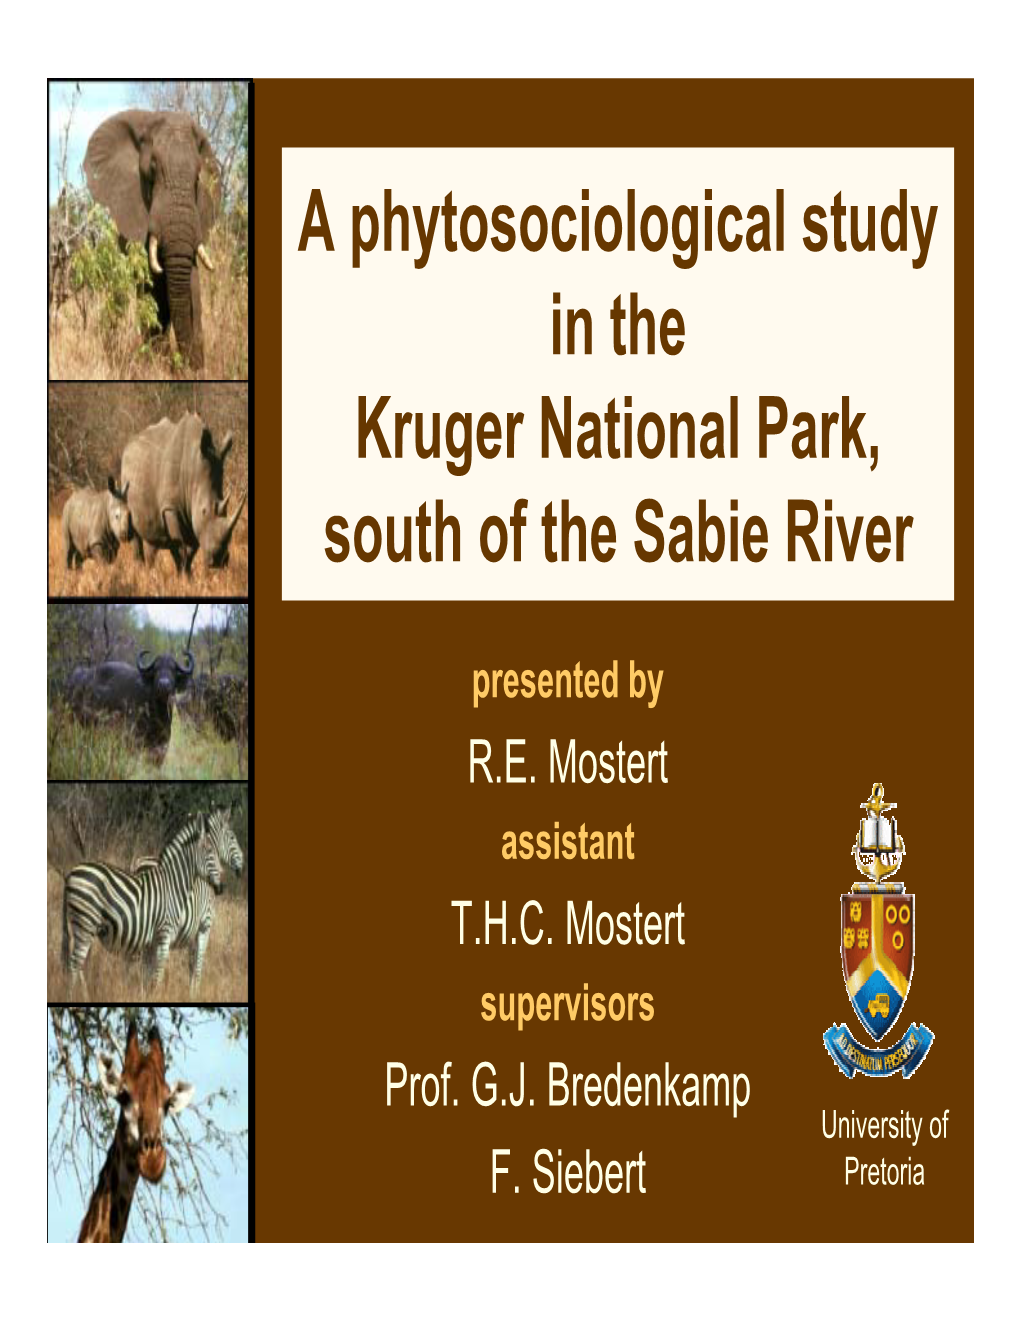 A Phytosociological Study in the Kruger National Park, South of the Sabie River